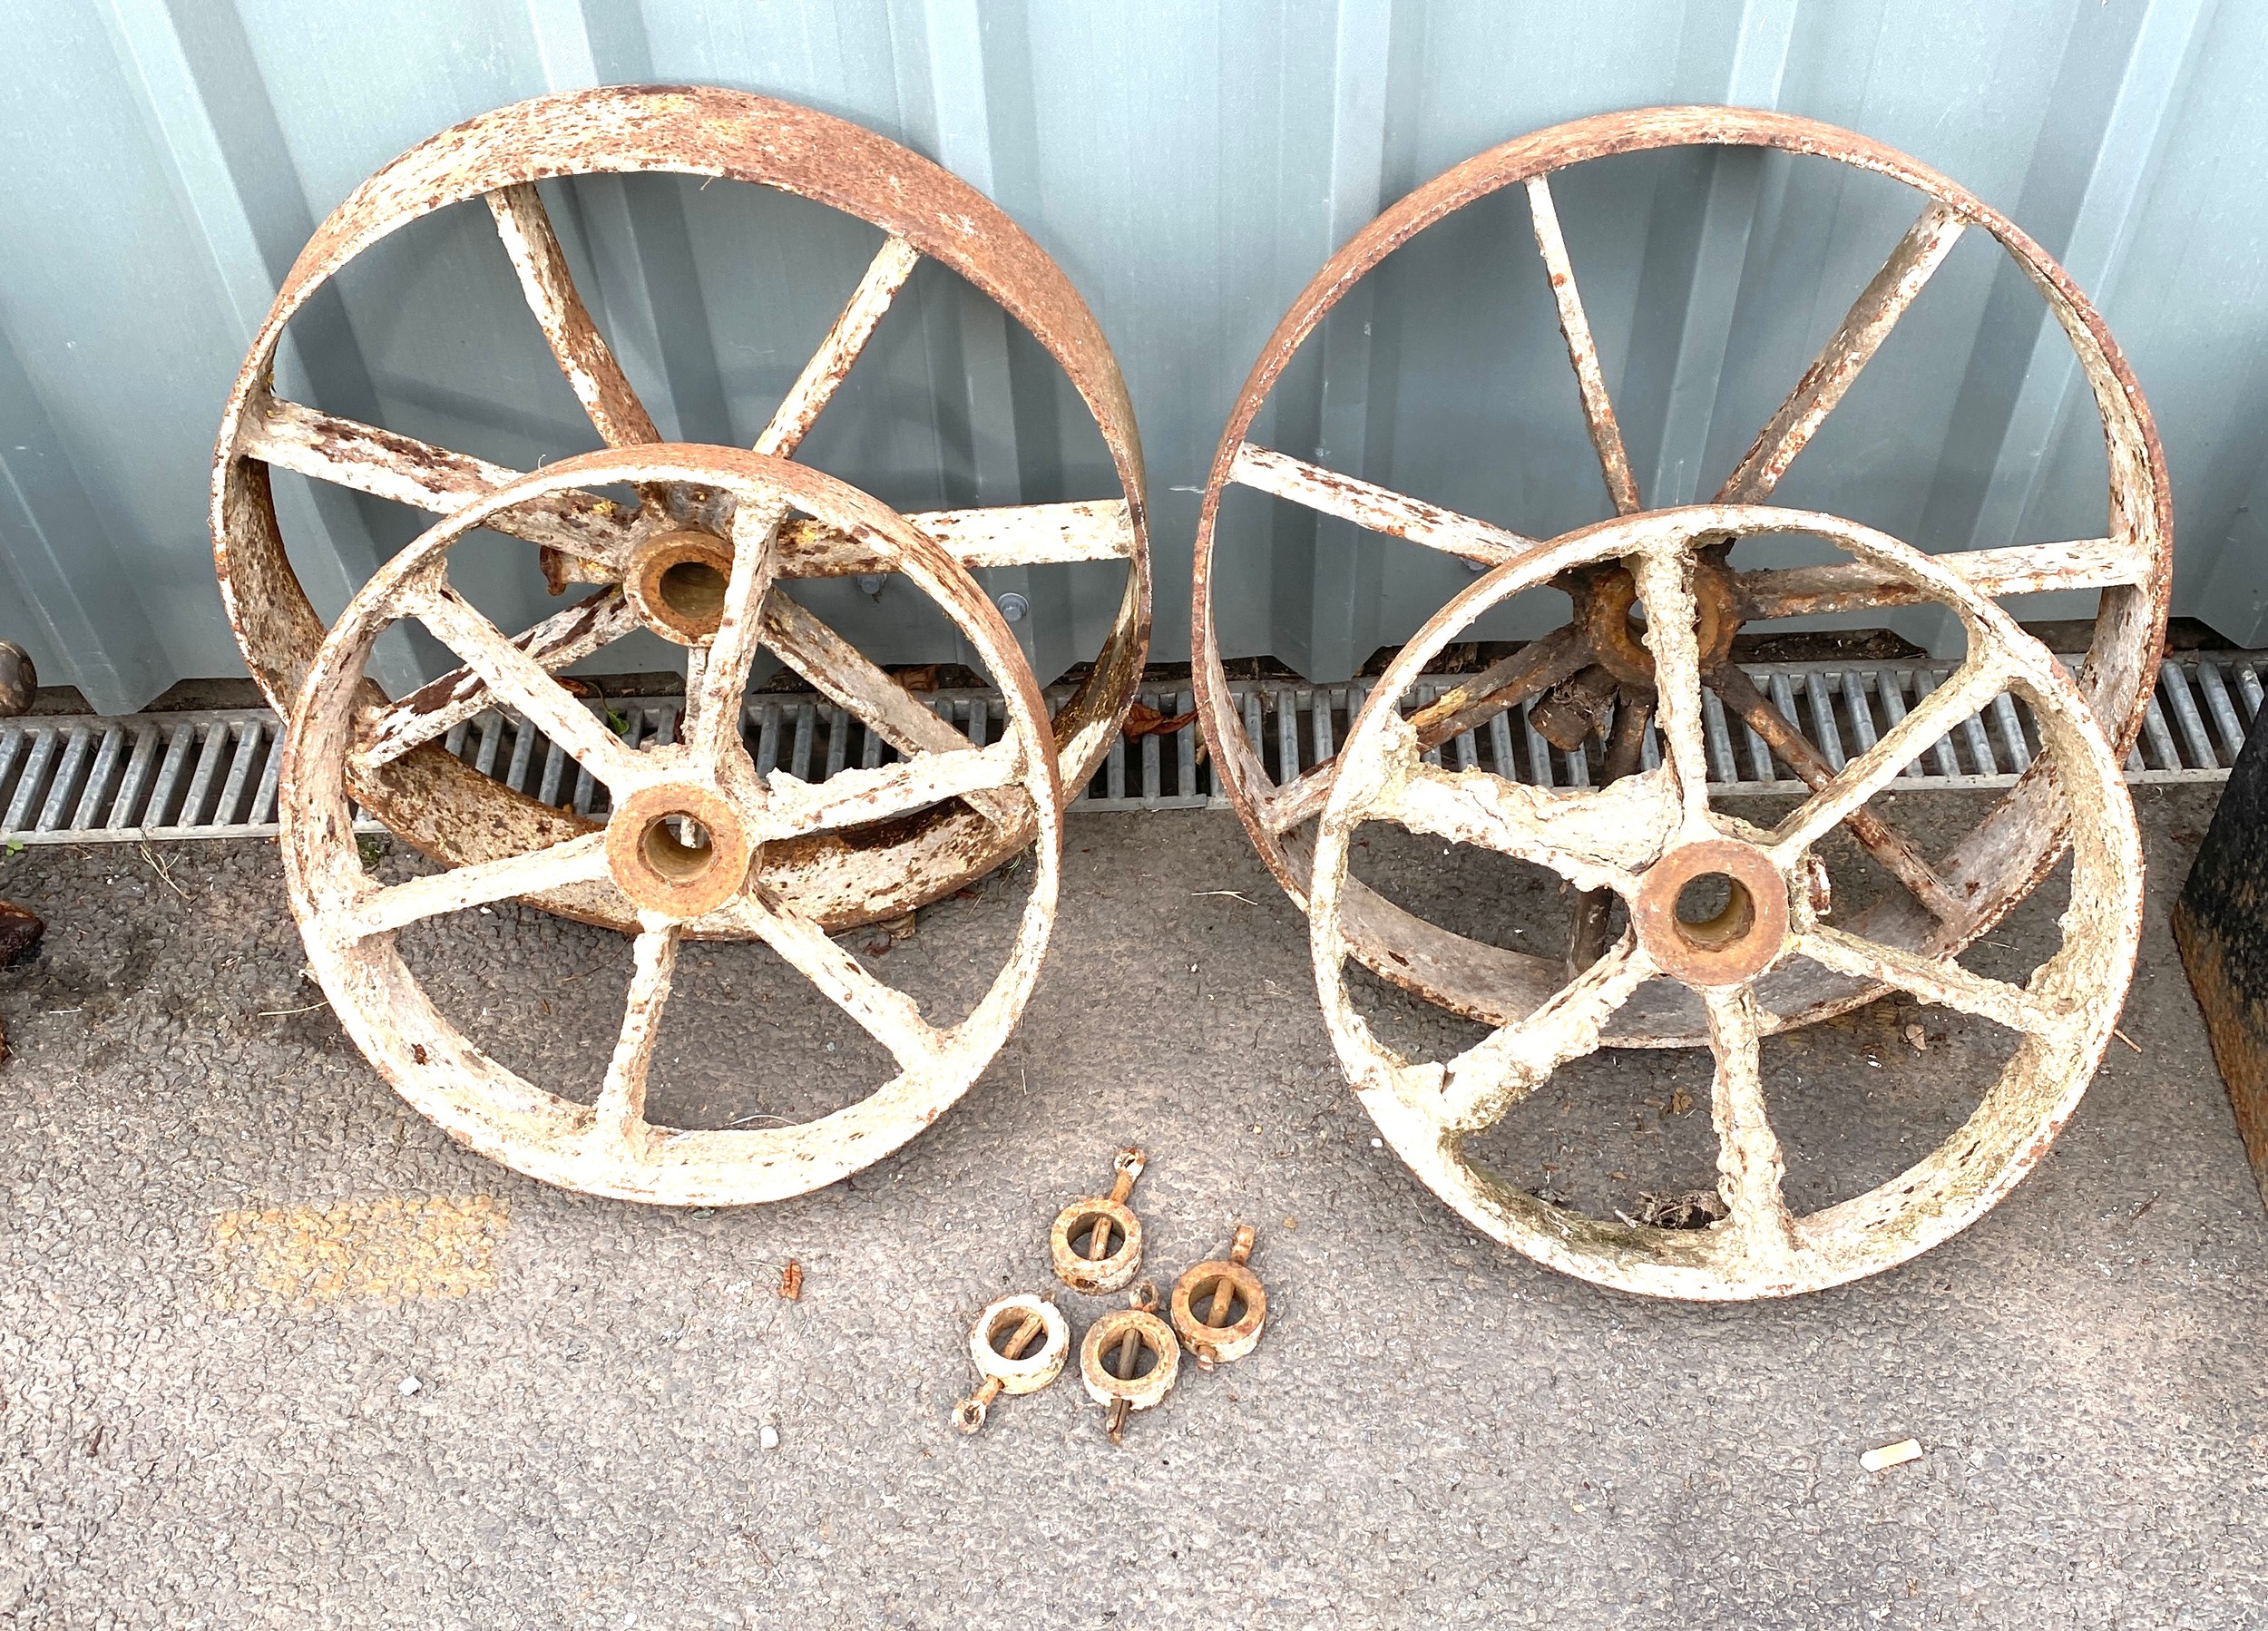 Four antique metal wheels measures approx diameter 20 inches